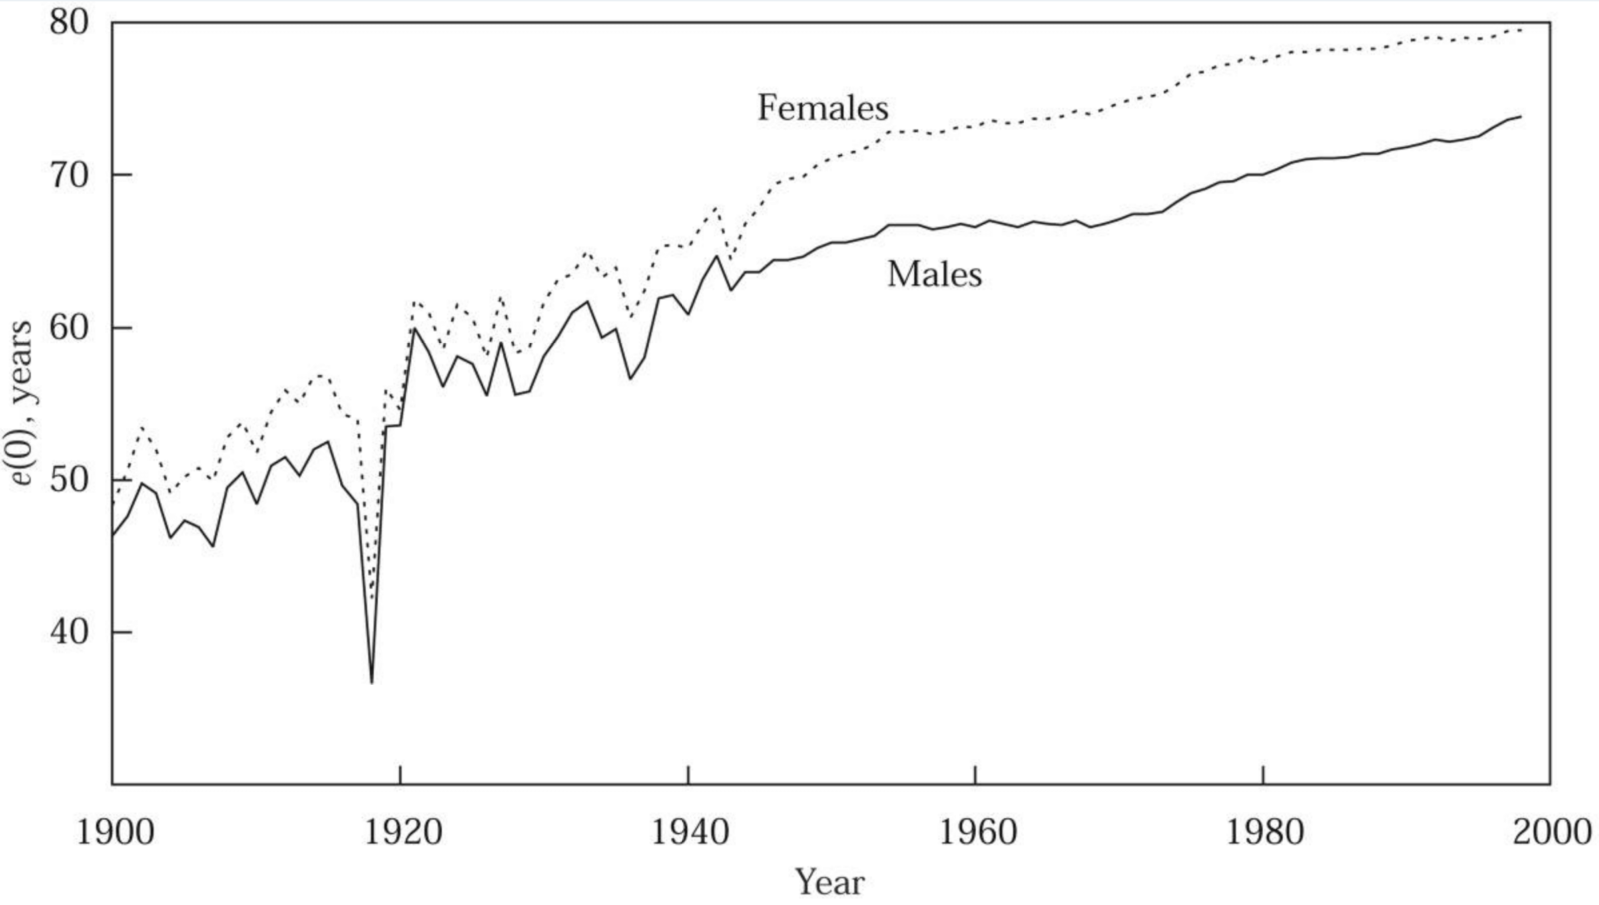 Drop in life expectancy in the United States with 1918 pandemic influenza